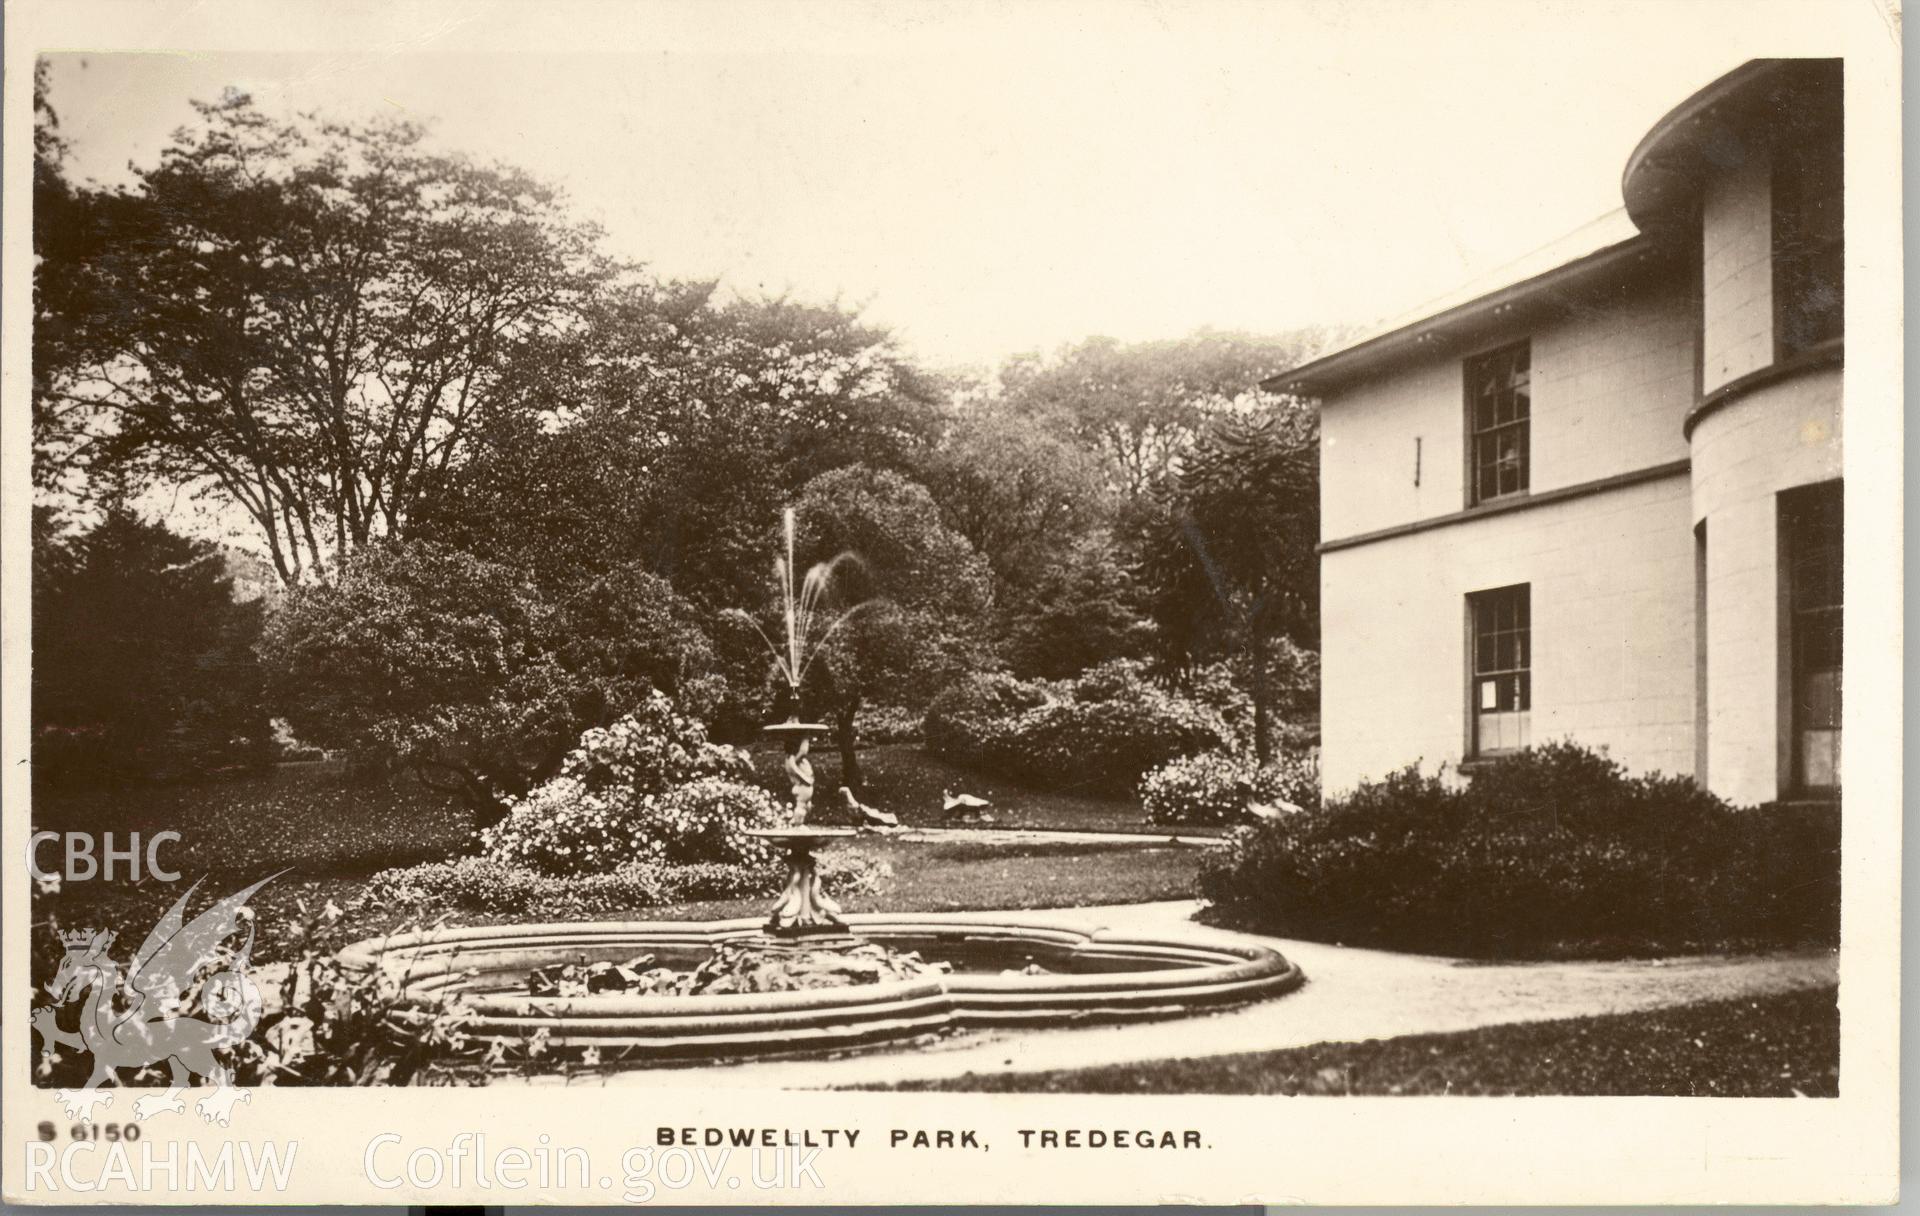 Digitised postcard image of Bedwellty House, Tredegar, Kingsway Real Photo serie. Produced by Parks and Gardens Data Services, from an original item in the Peter Davis Collection at Parks and Gardens UK. We hold only web-resolution images of this collection, suitable for viewing on screen and for research purposes only. We do not hold the original images, or publication quality scans.